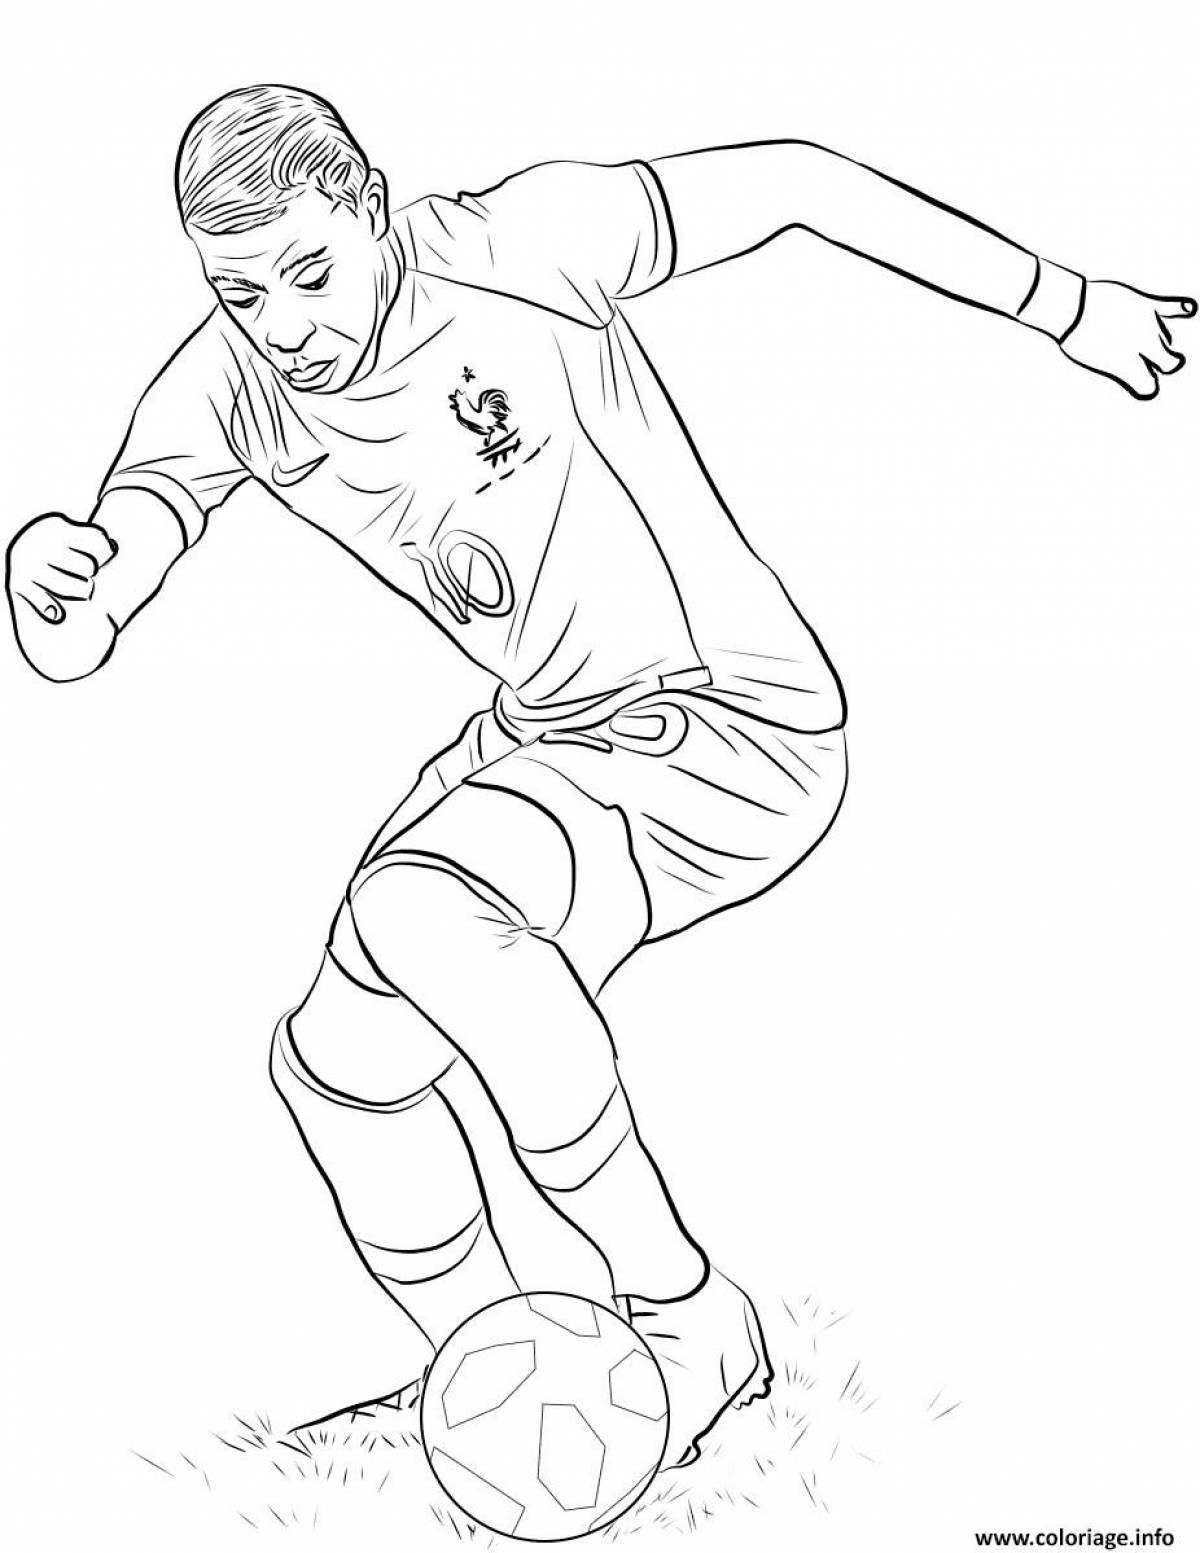 Powerful soccer player coloring page